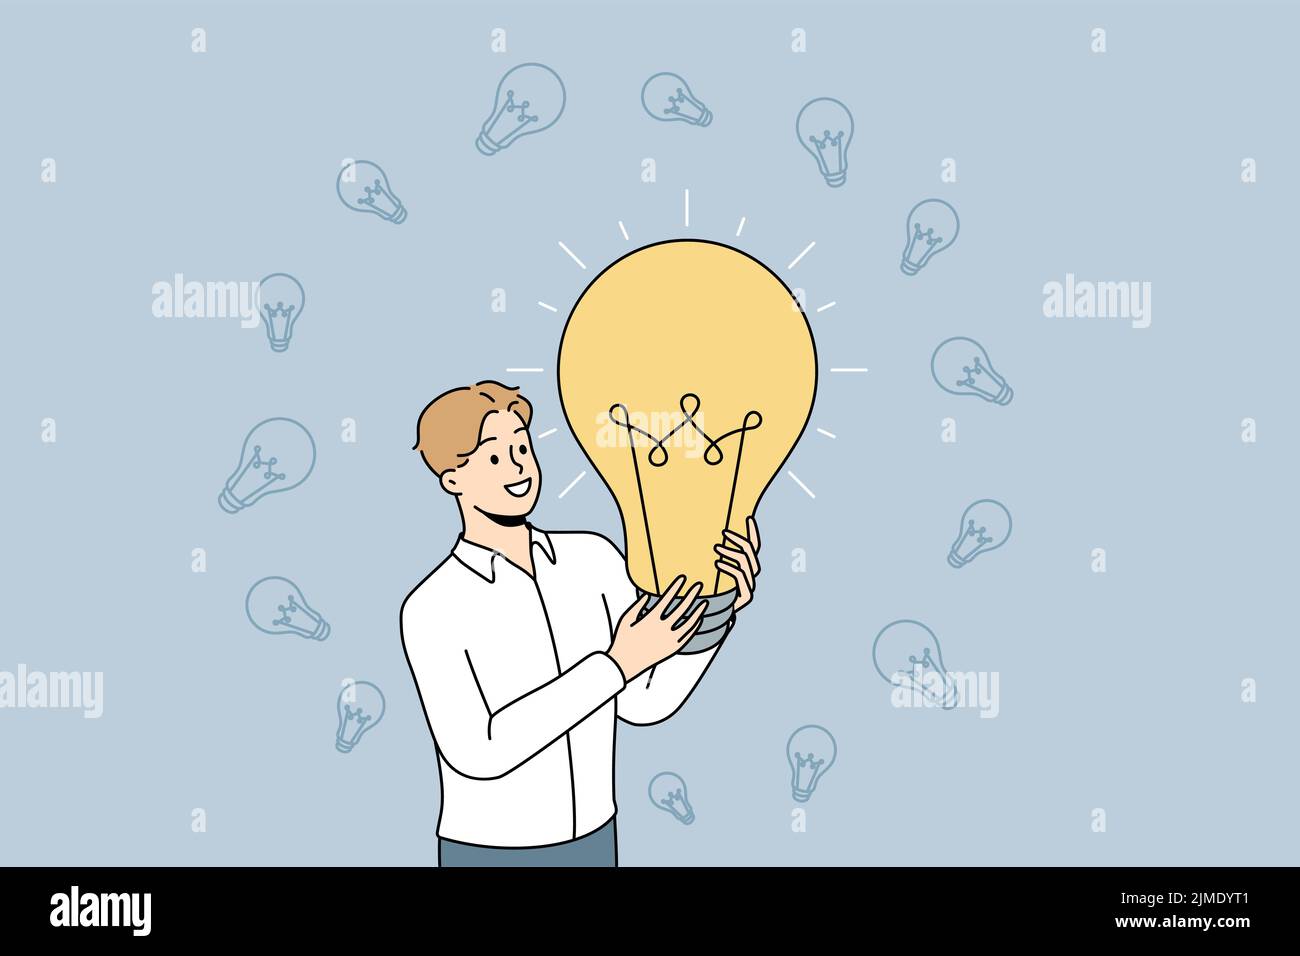 Happy businessman holding lightbulb excited about creative business idea. Smiling man employee generate innovative project. Innovation concept. Vector illustration.  Stock Vector